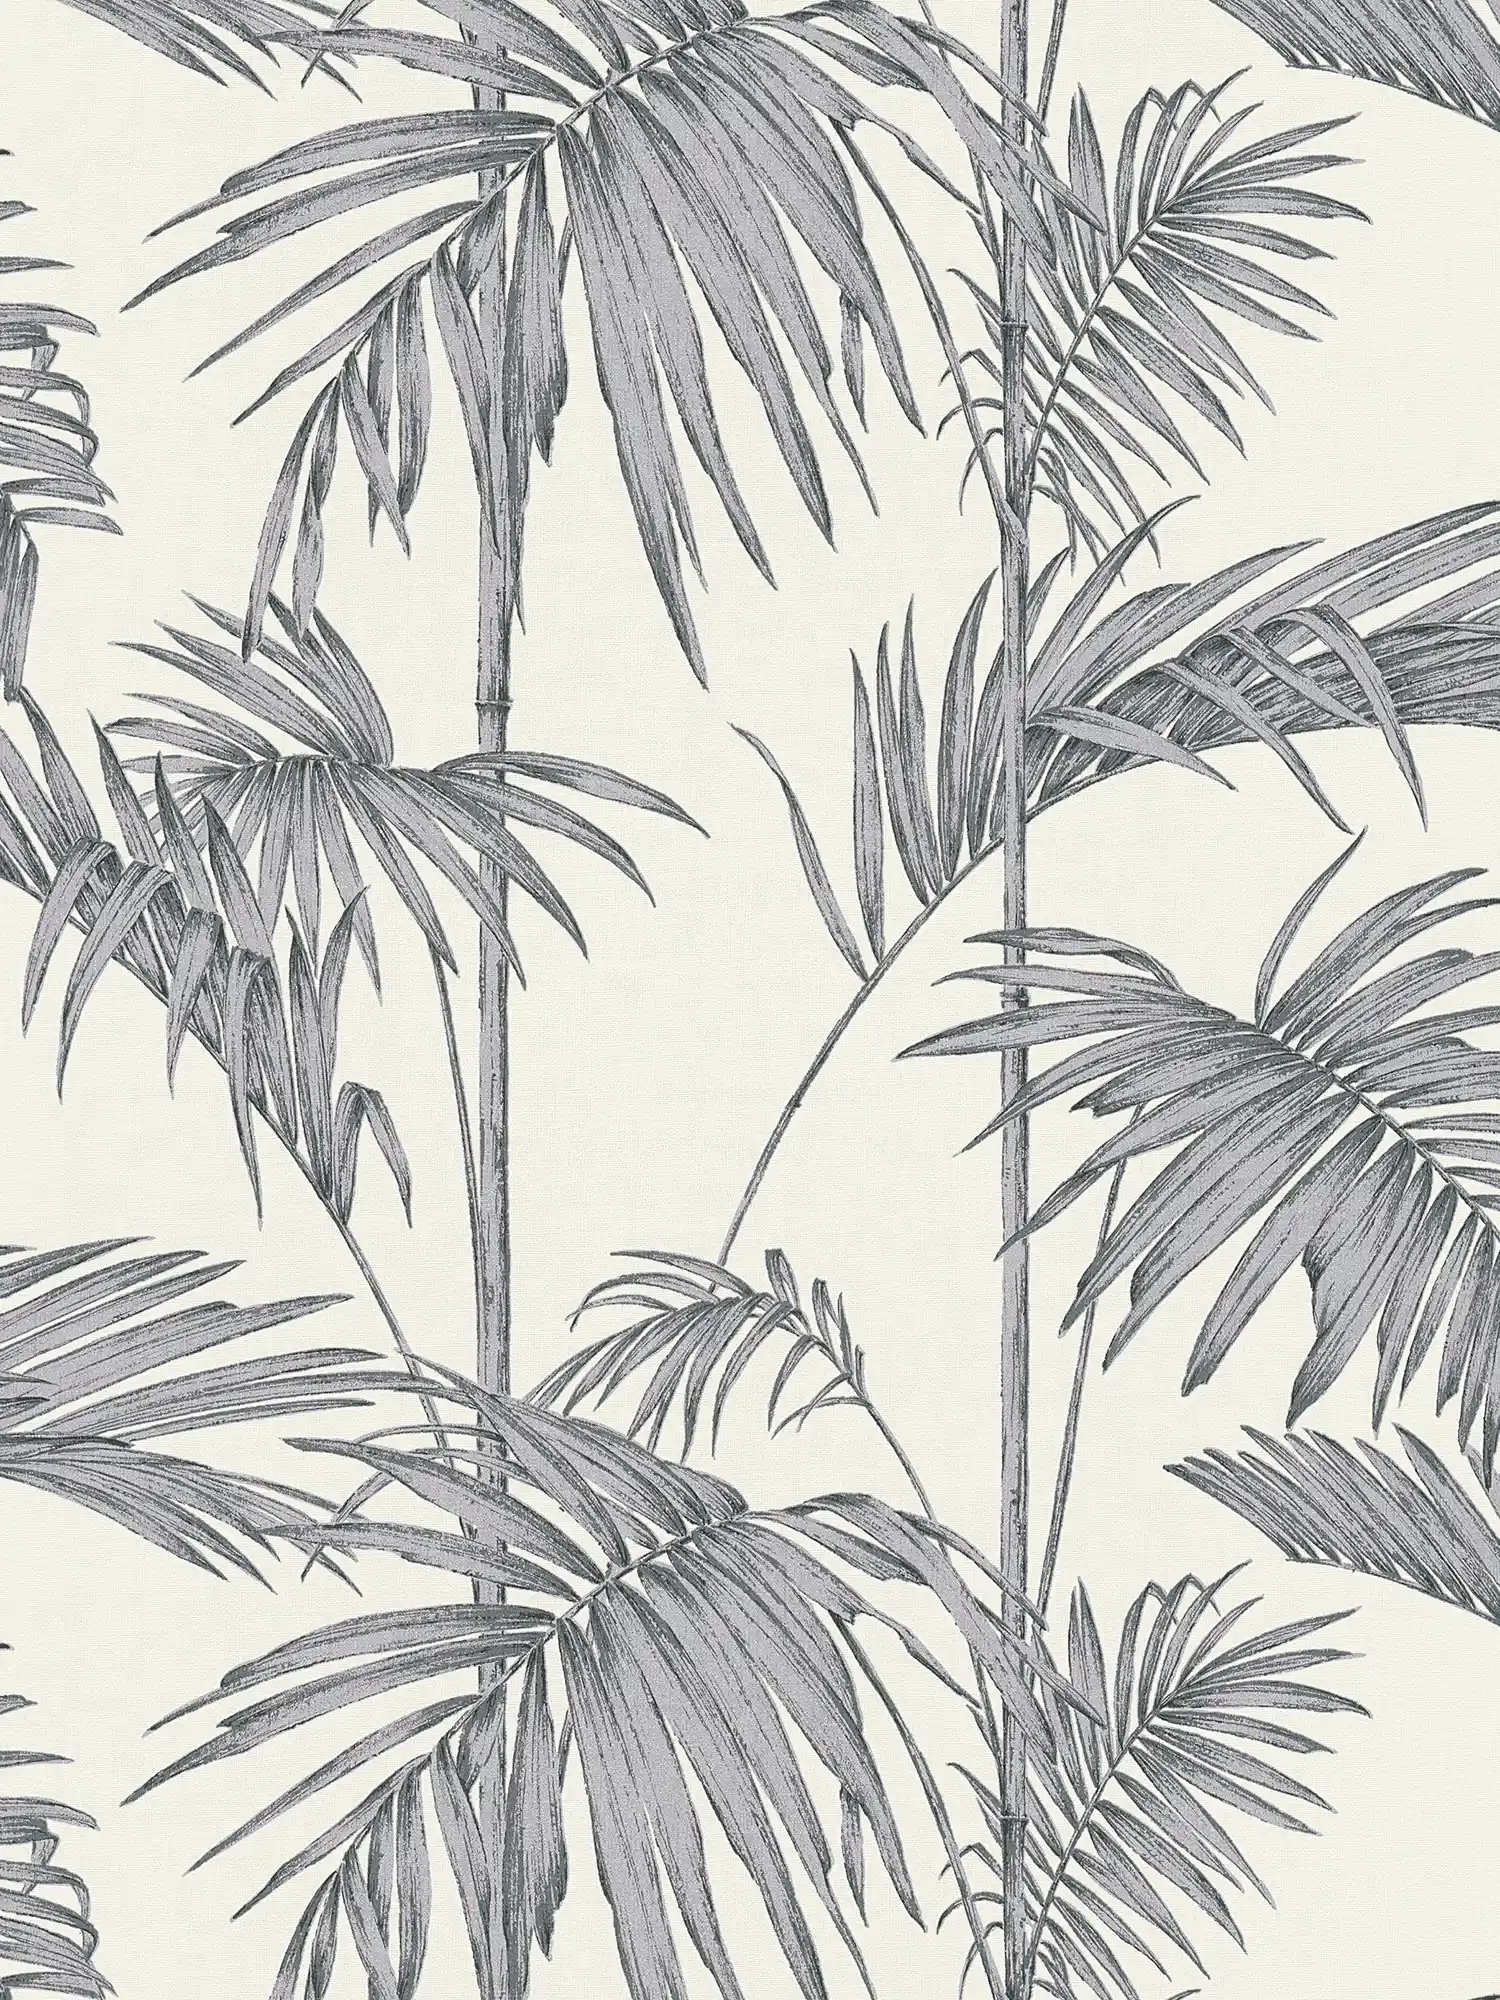 Nature wallpaper palm leaves, bamboo - grey, silver, white
